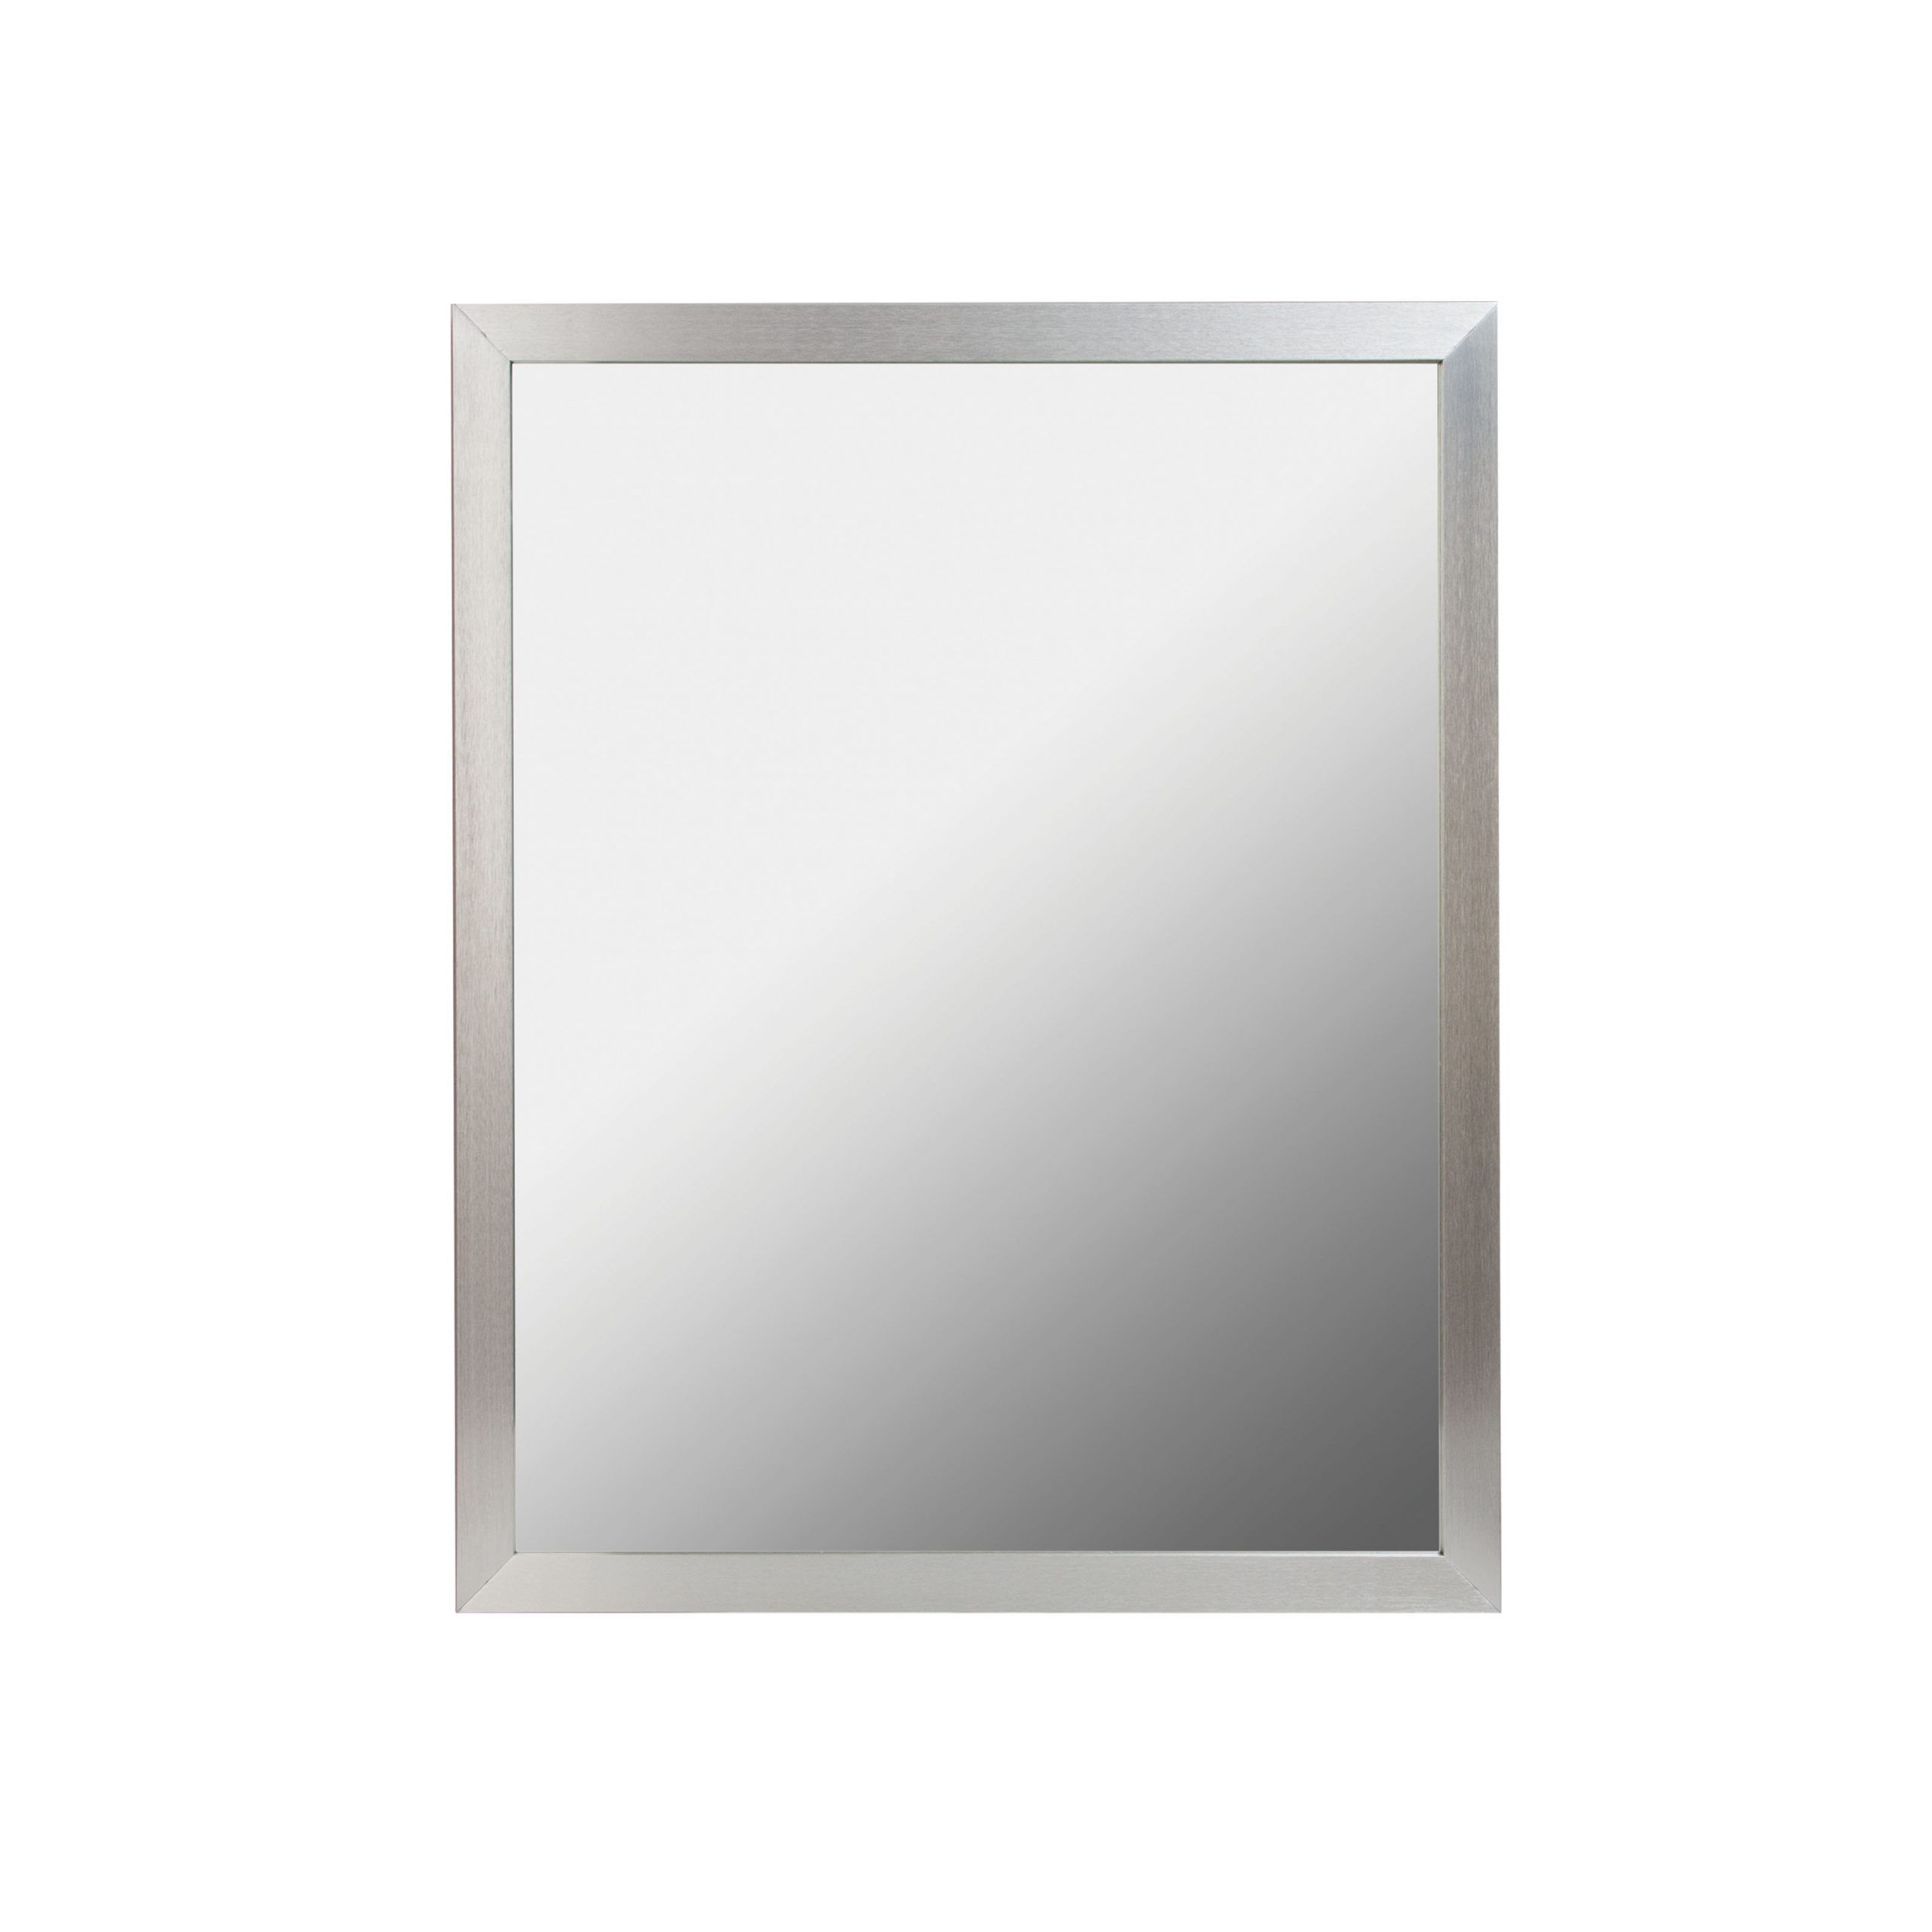 24X30 Aluminum Framed Mirror In Brushed Nickel – Foremost Bath For Brushed Nickel Octagon Mirrors (View 3 of 15)